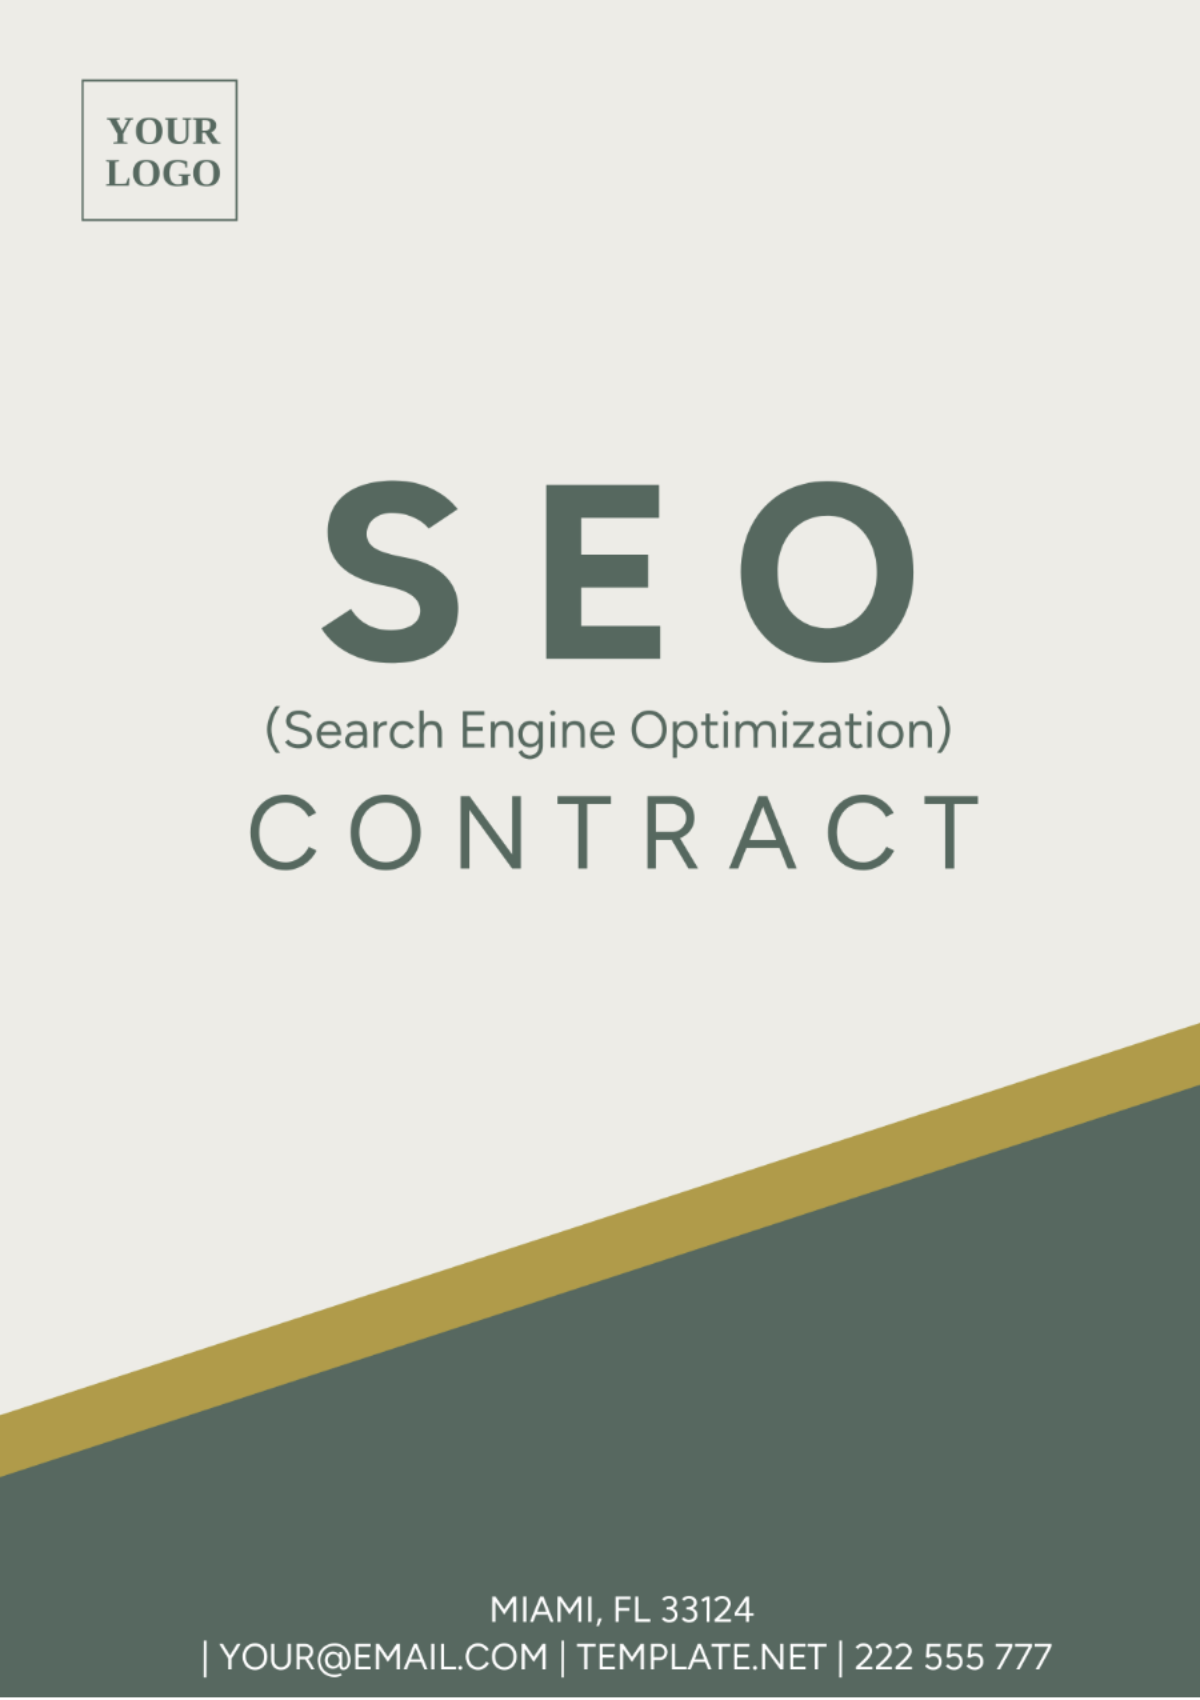 SEO Contract Template